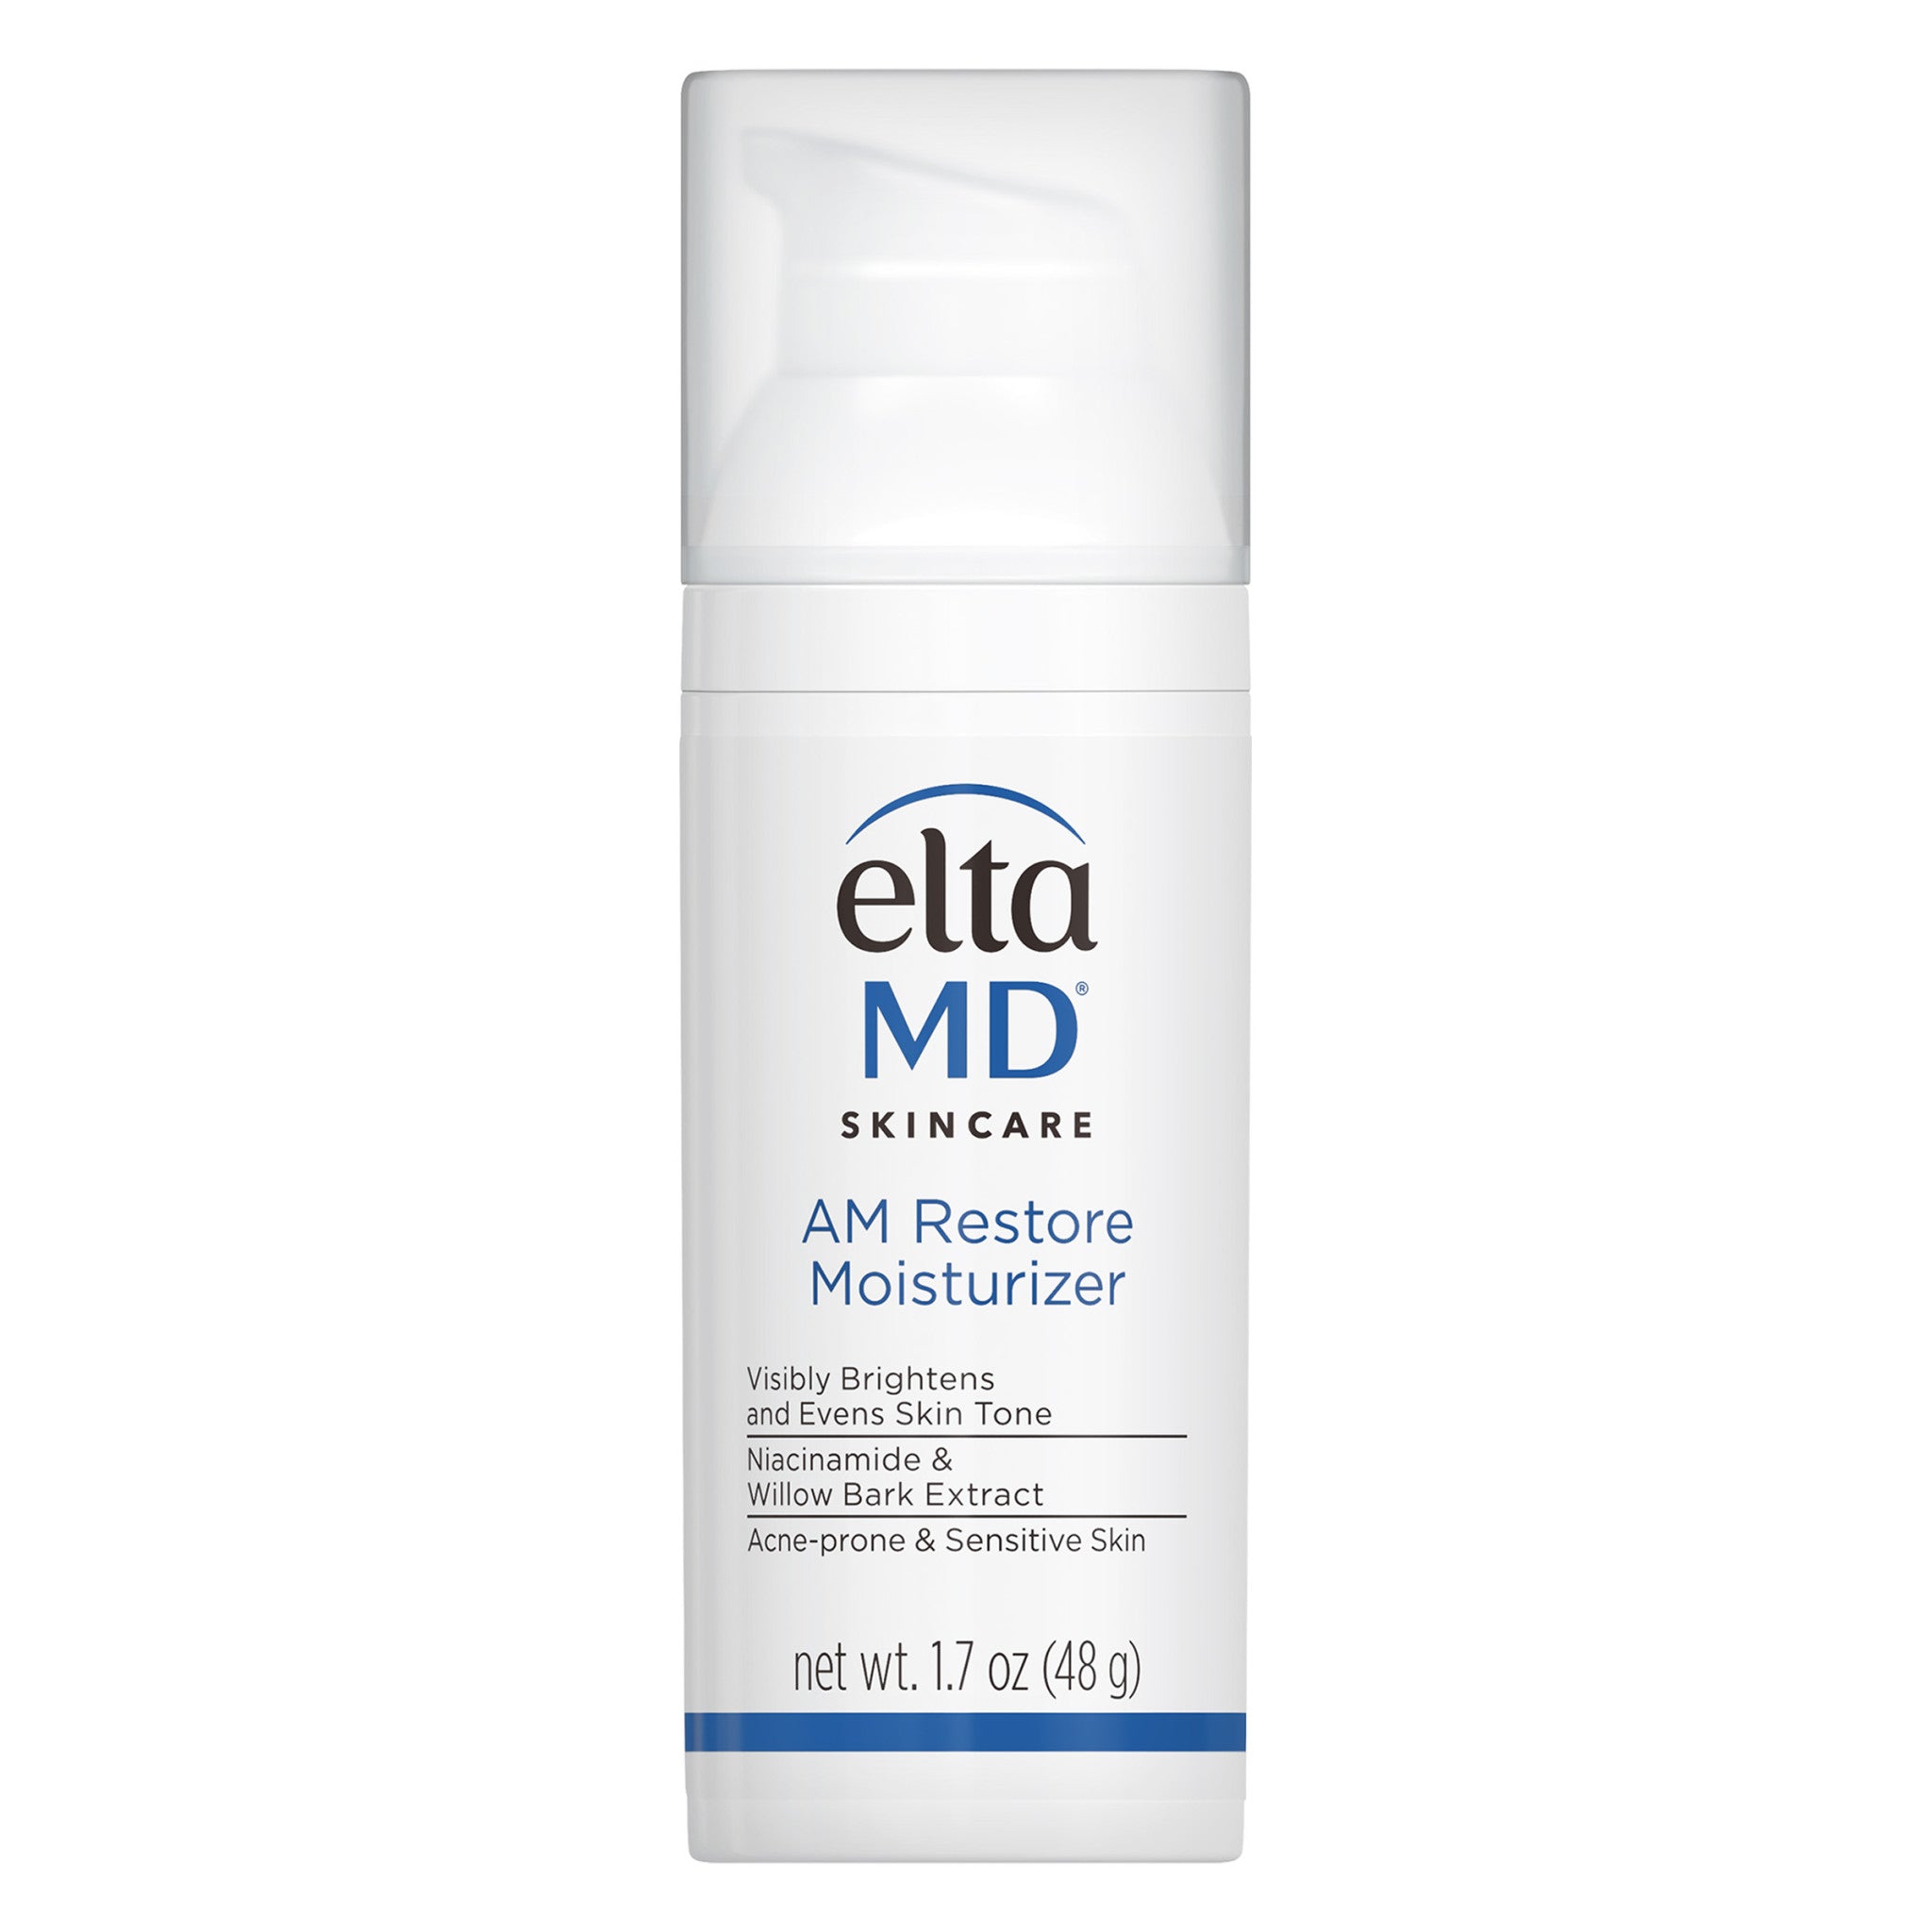 EltaMD AM Therapy Facial Moisturizer main image.